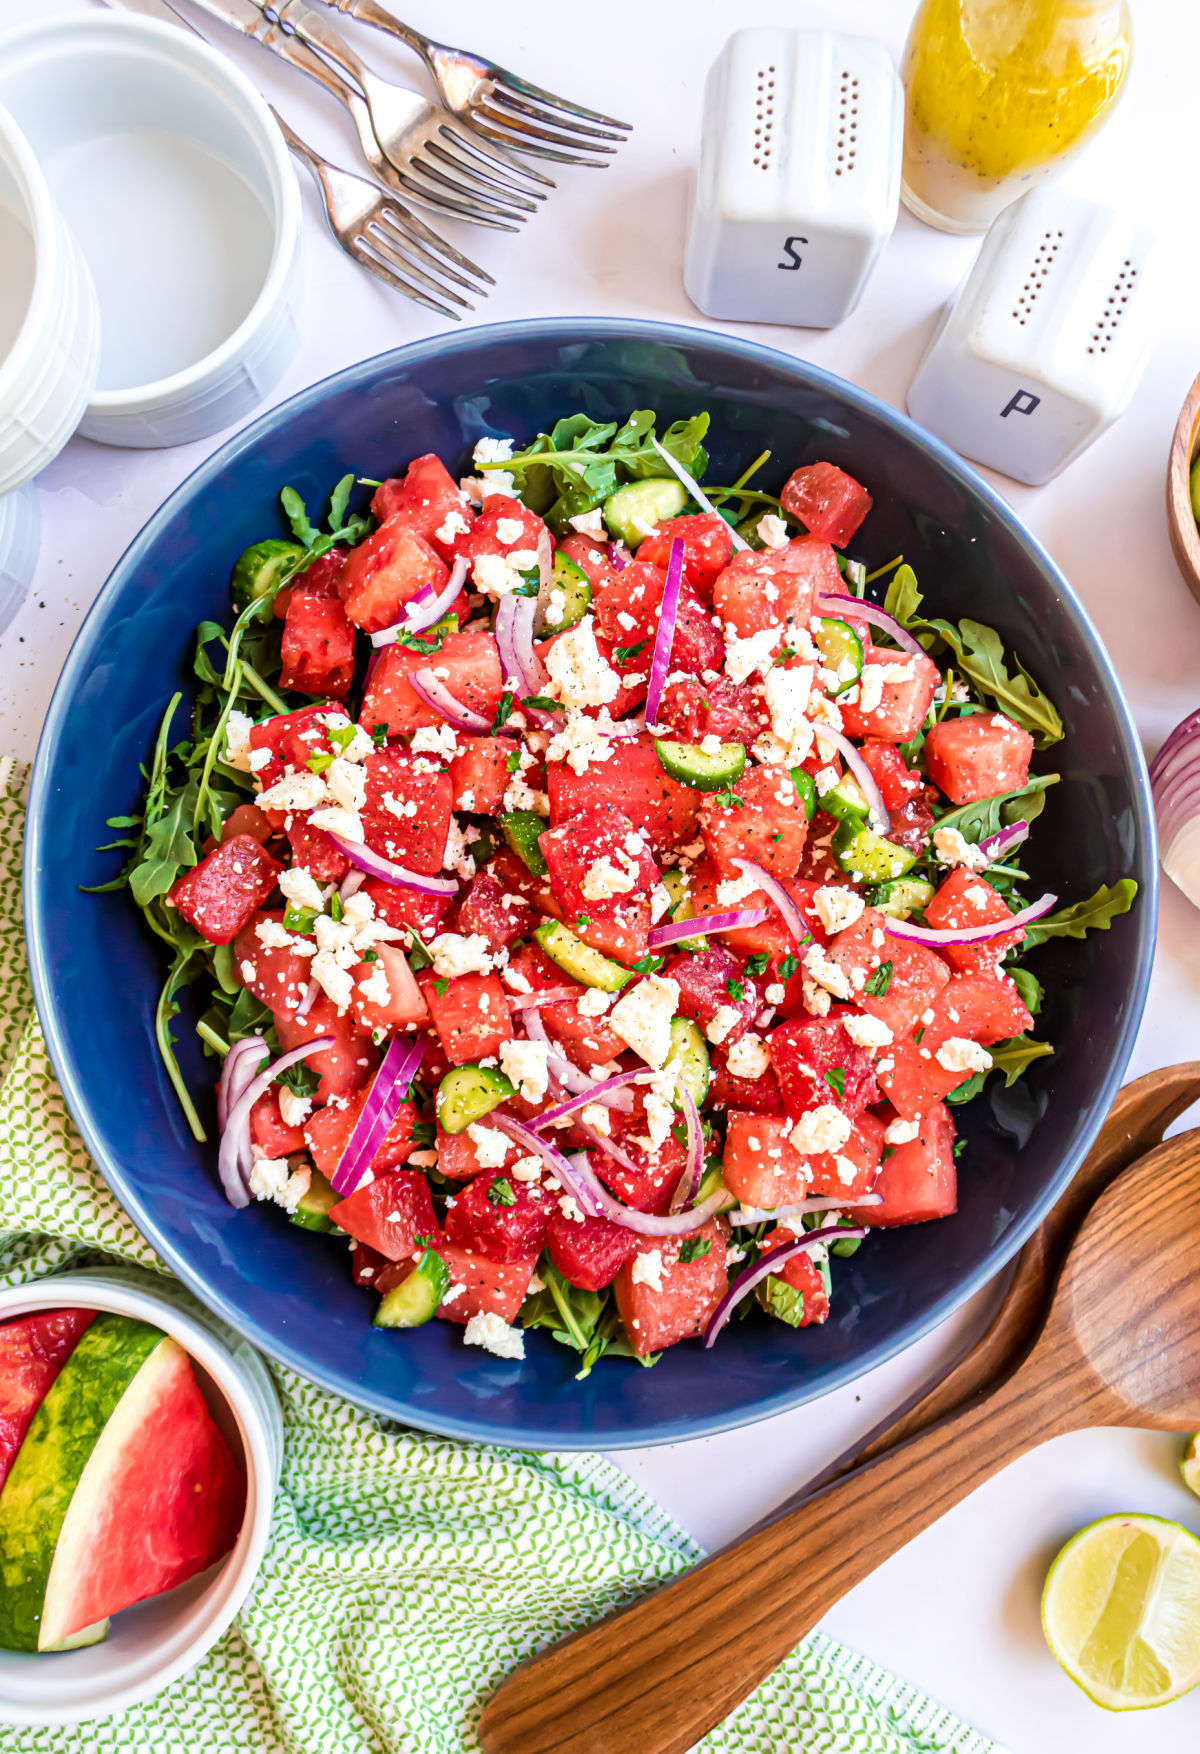 Watermelon salad served with feta cheese in a large blue bowl.